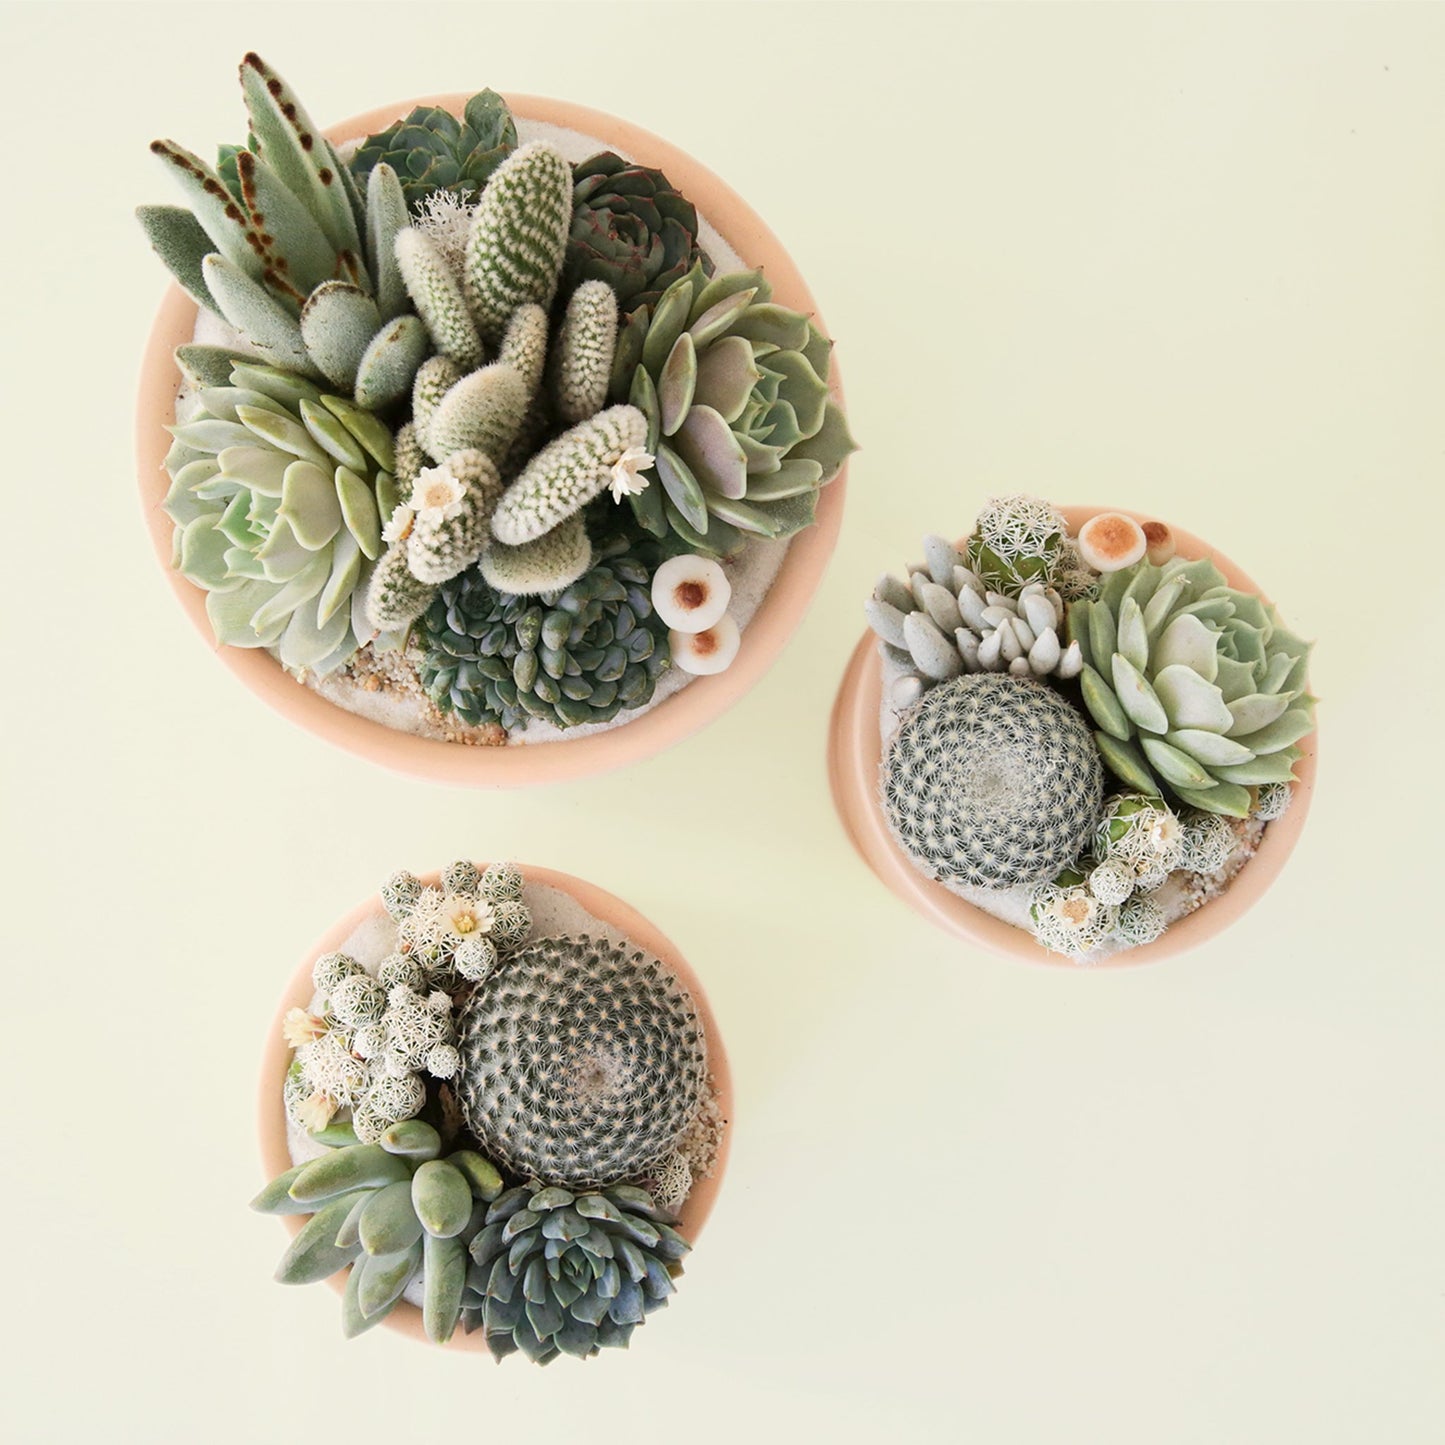 Overhead view of three potted succulent plantings against soft green background. Two of the pots are a larger size and one to the right is smaller. The plantings are potted in soft orange ceramic bowls and are filled with a variety of purple and green cacti, succulents and more.